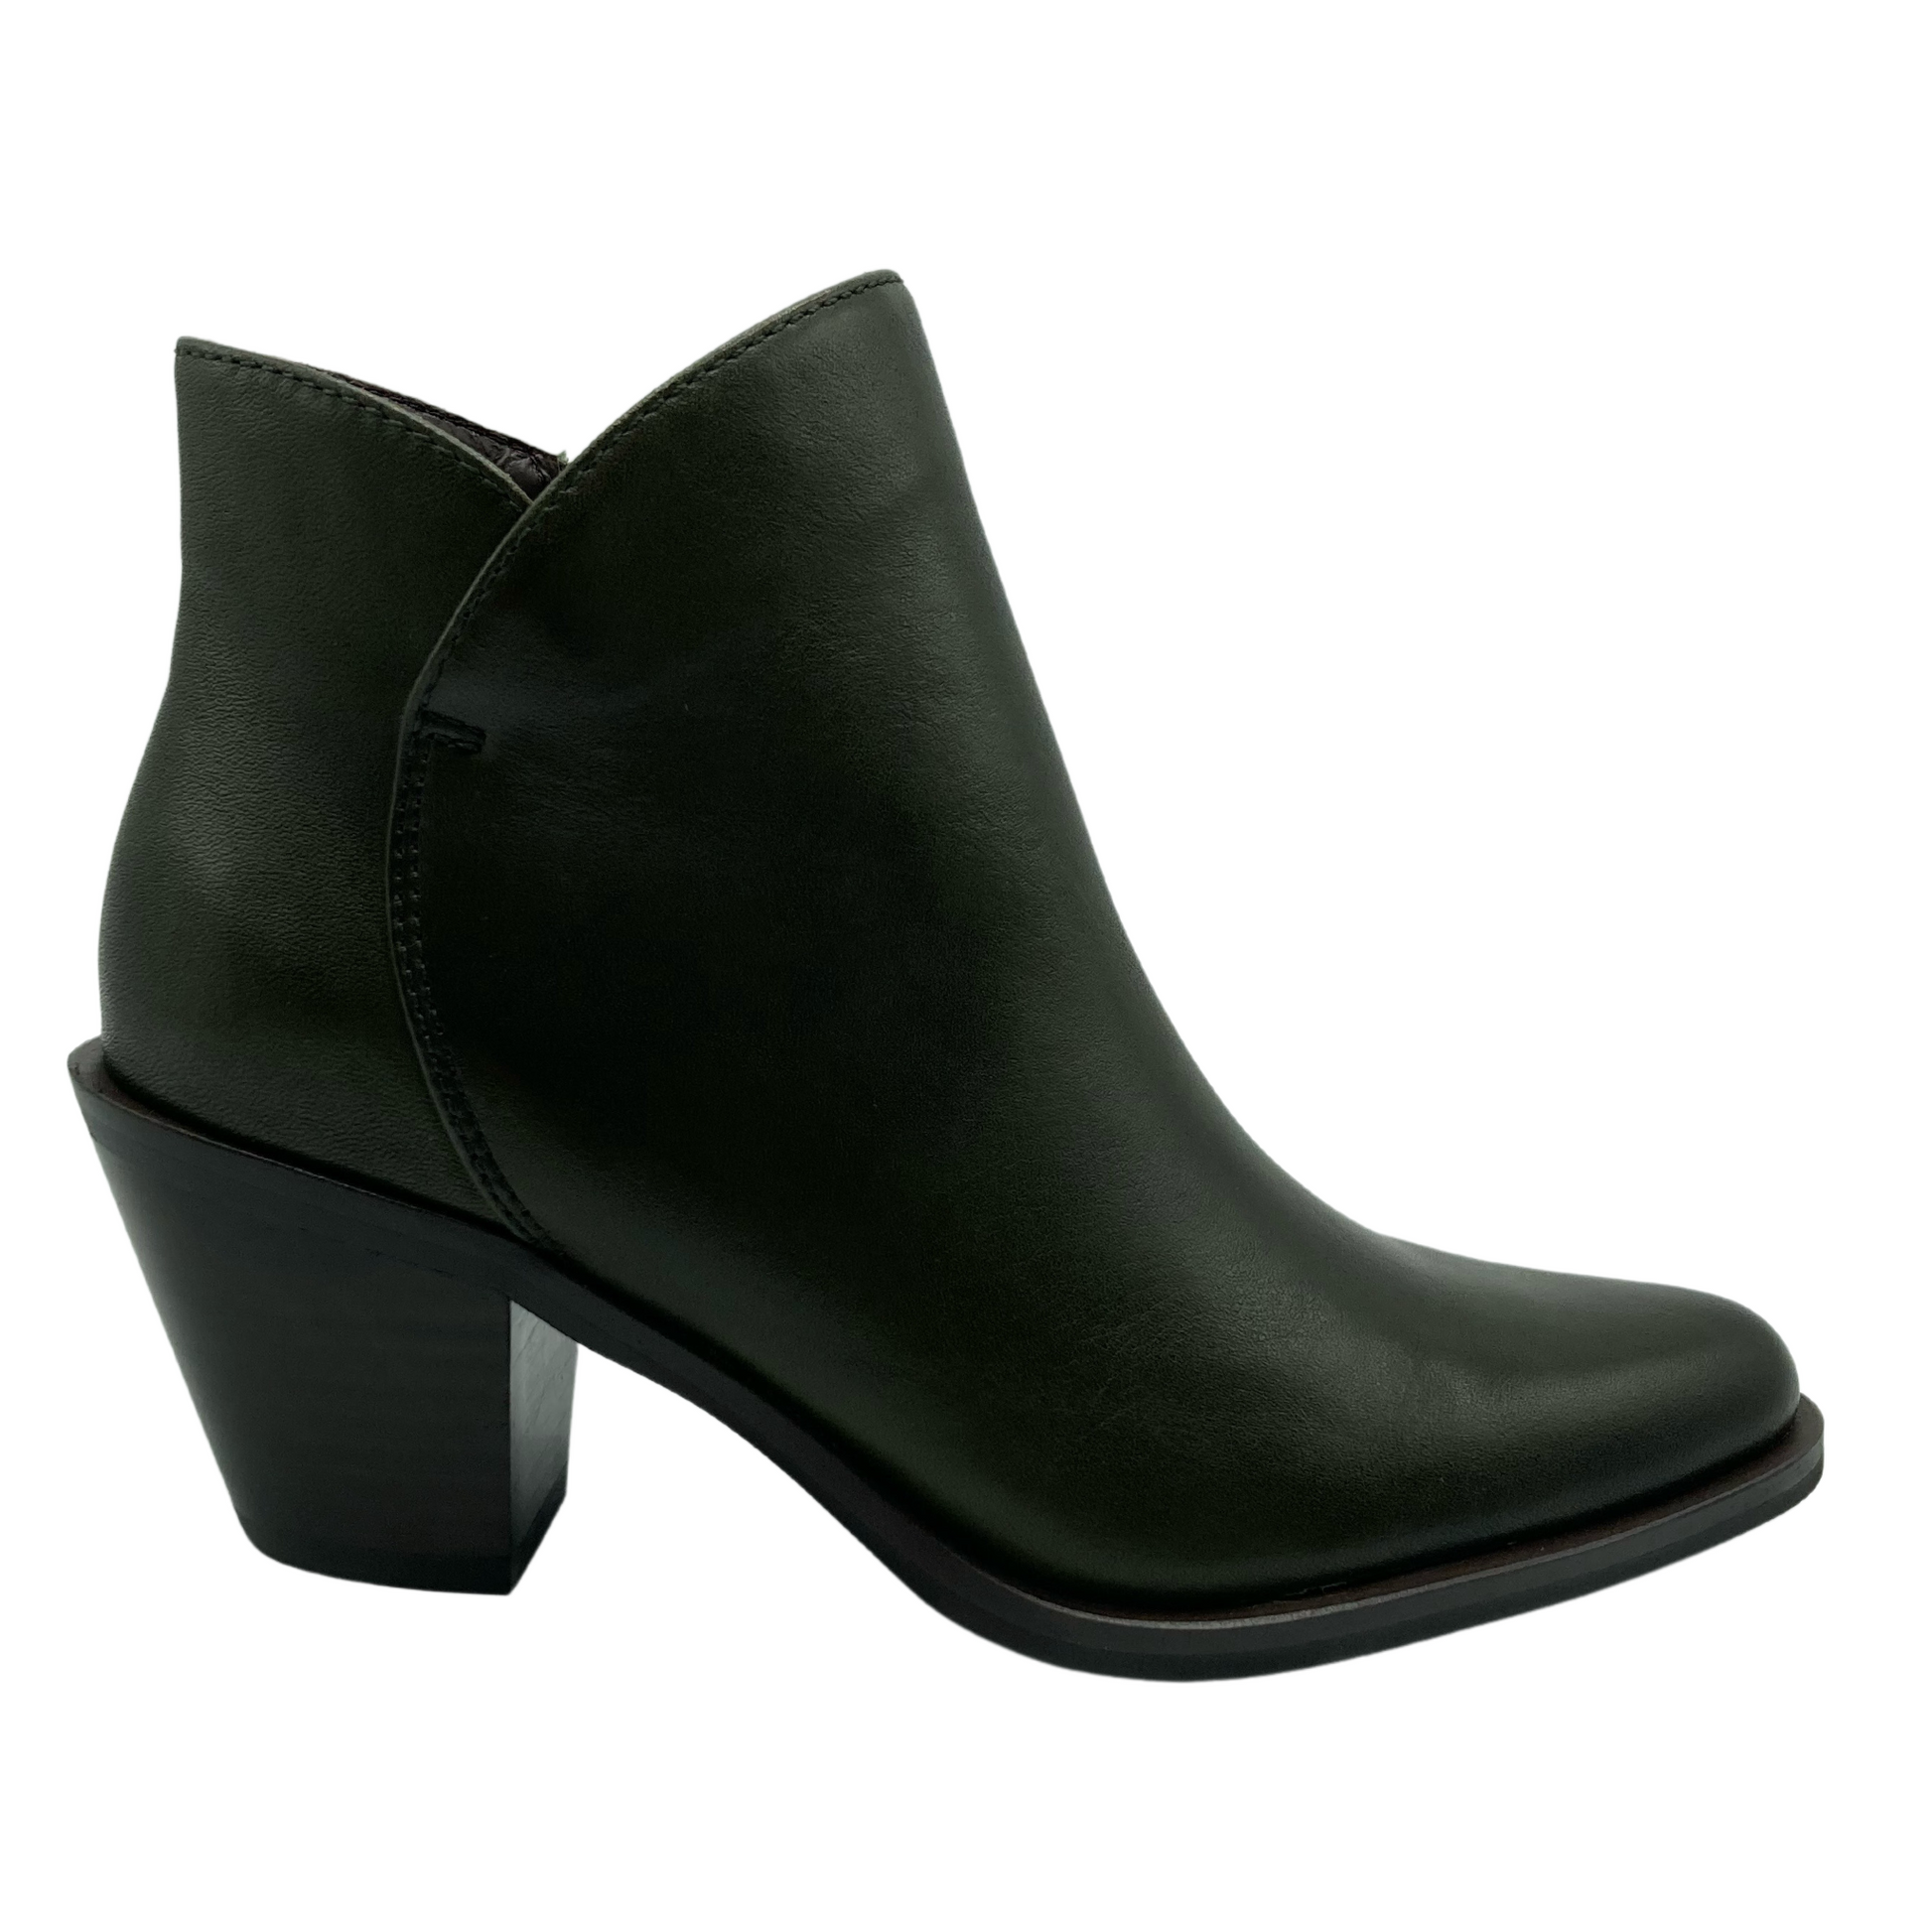 Right facing view of olive green leather ankle boot with scallop top line and chunky heel